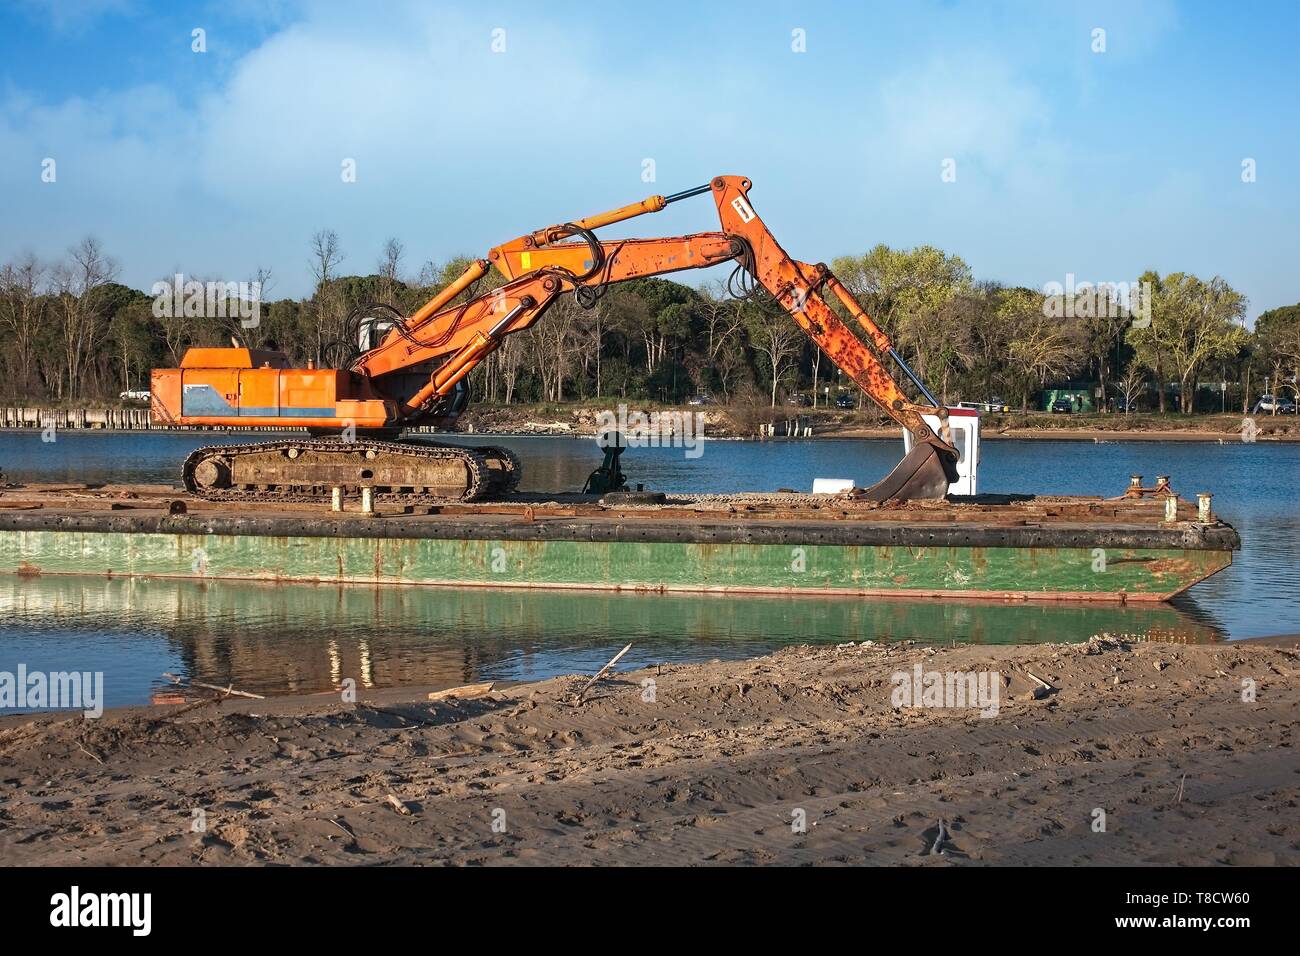 Excavator for channel dredge on a barge. Stock Photo